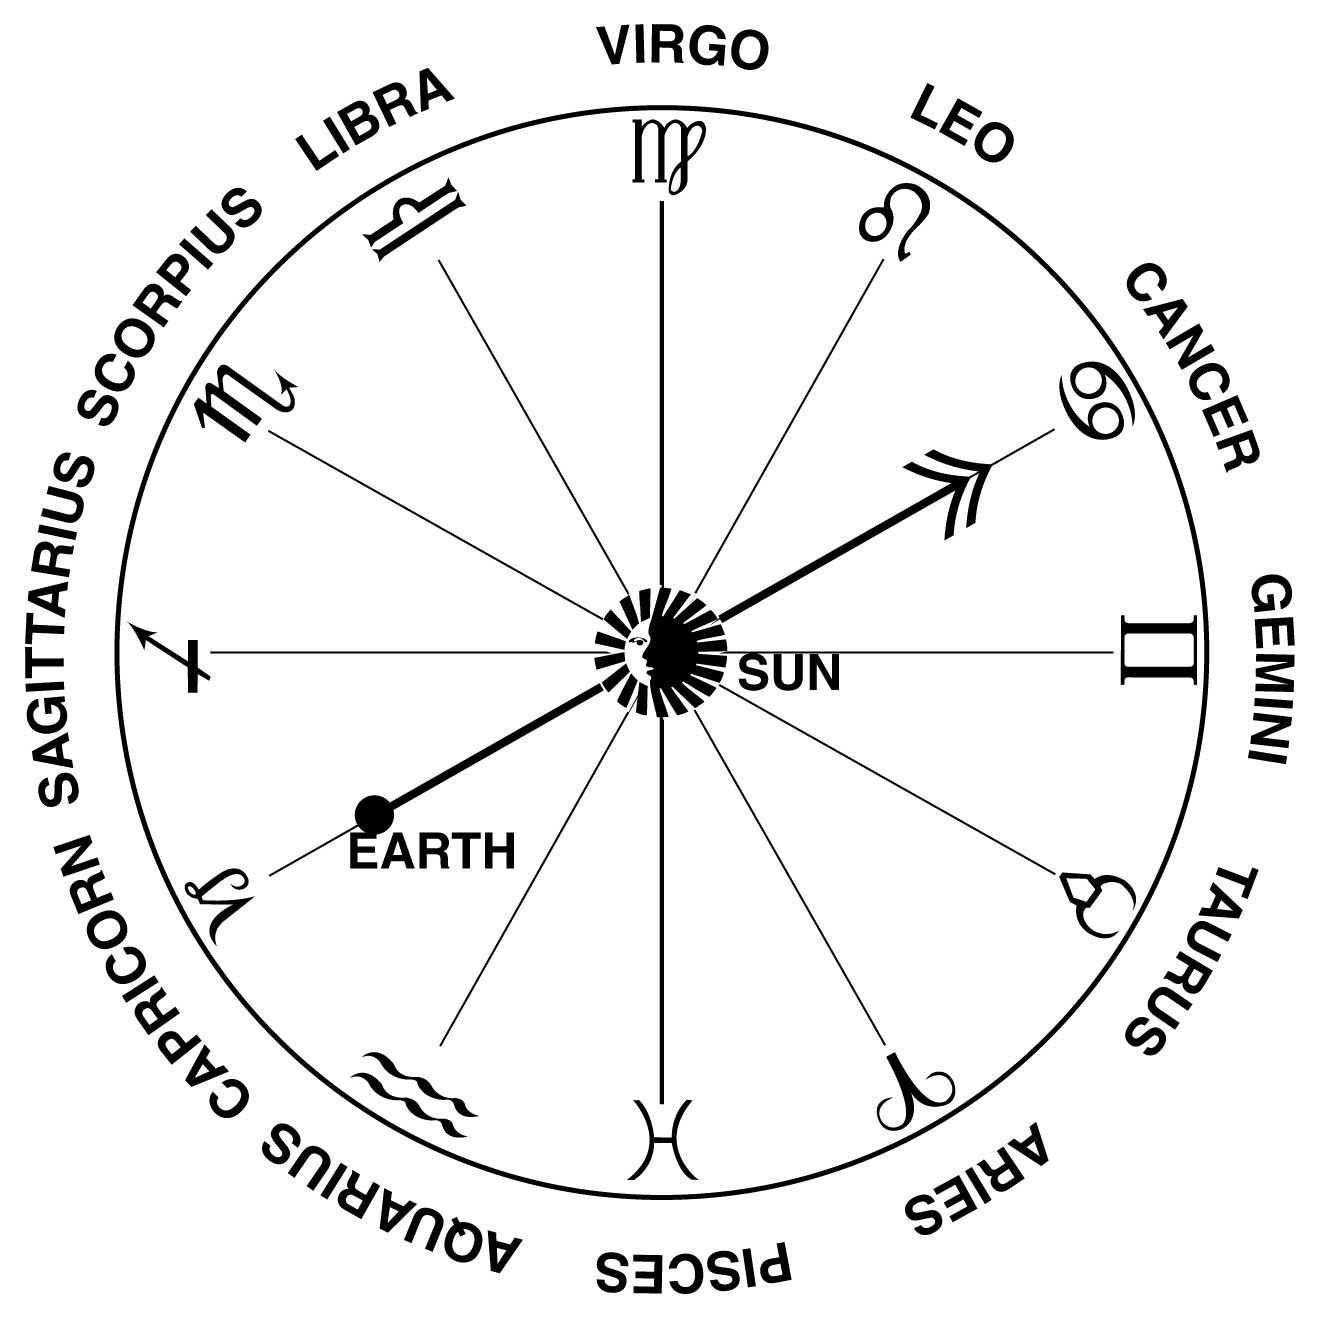 How many zodiac signs exist?